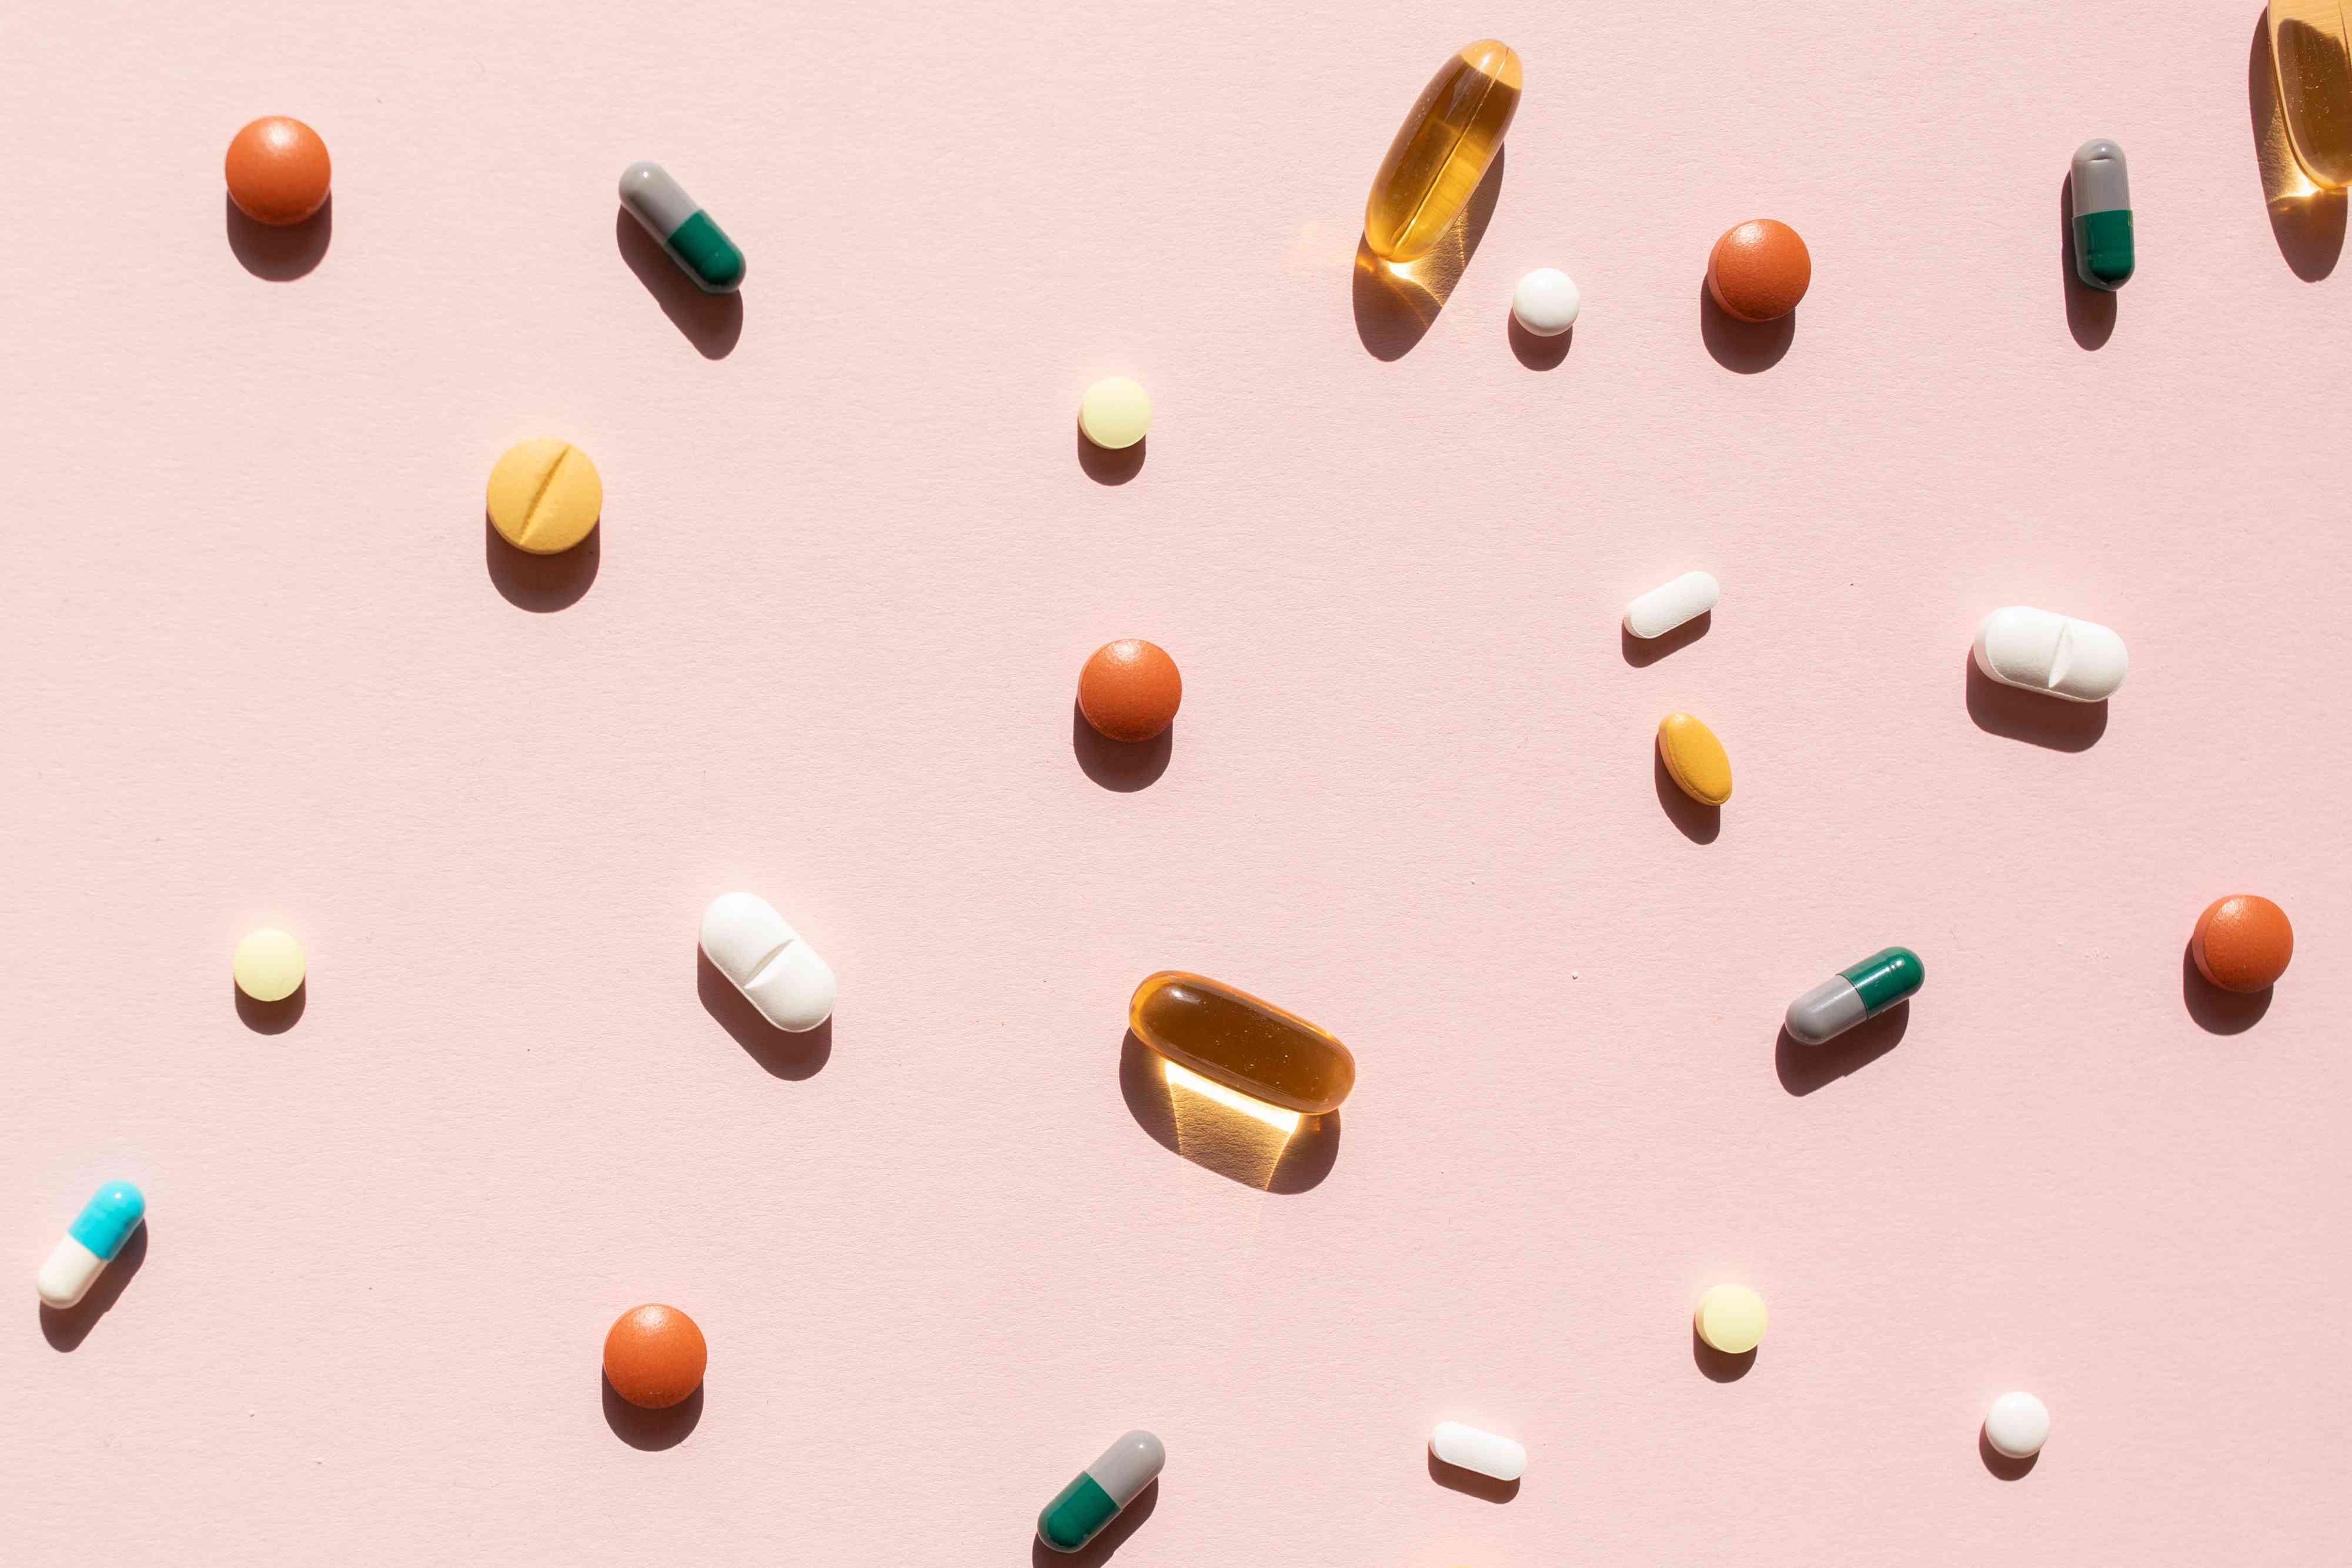 6 Supplements That Make Acne Worse, According to a Dermatologist